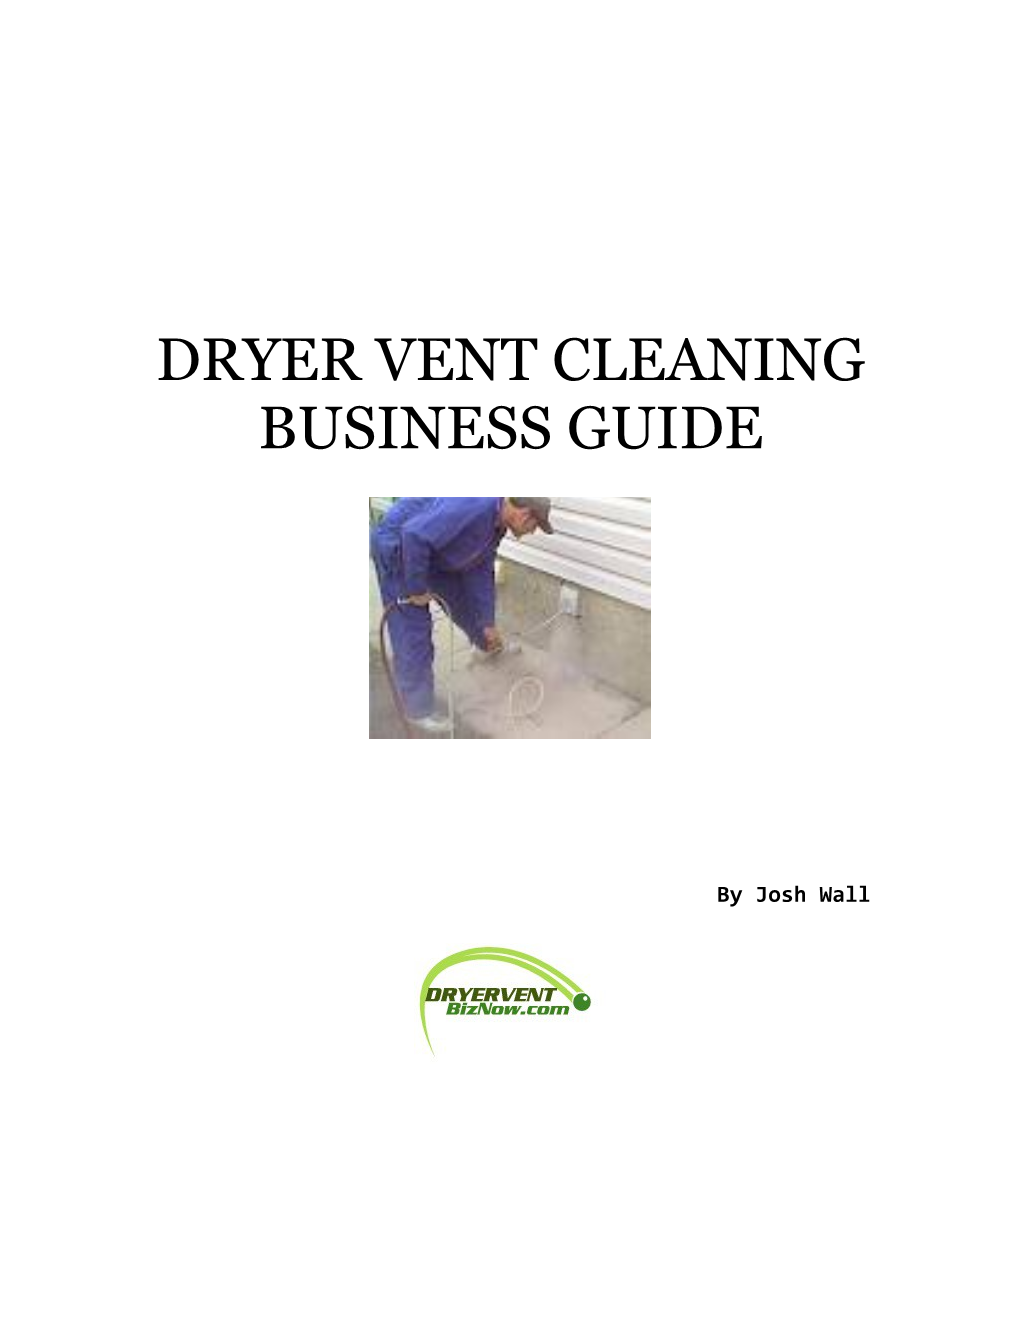 Dryer Vent Cleaning Business Guide